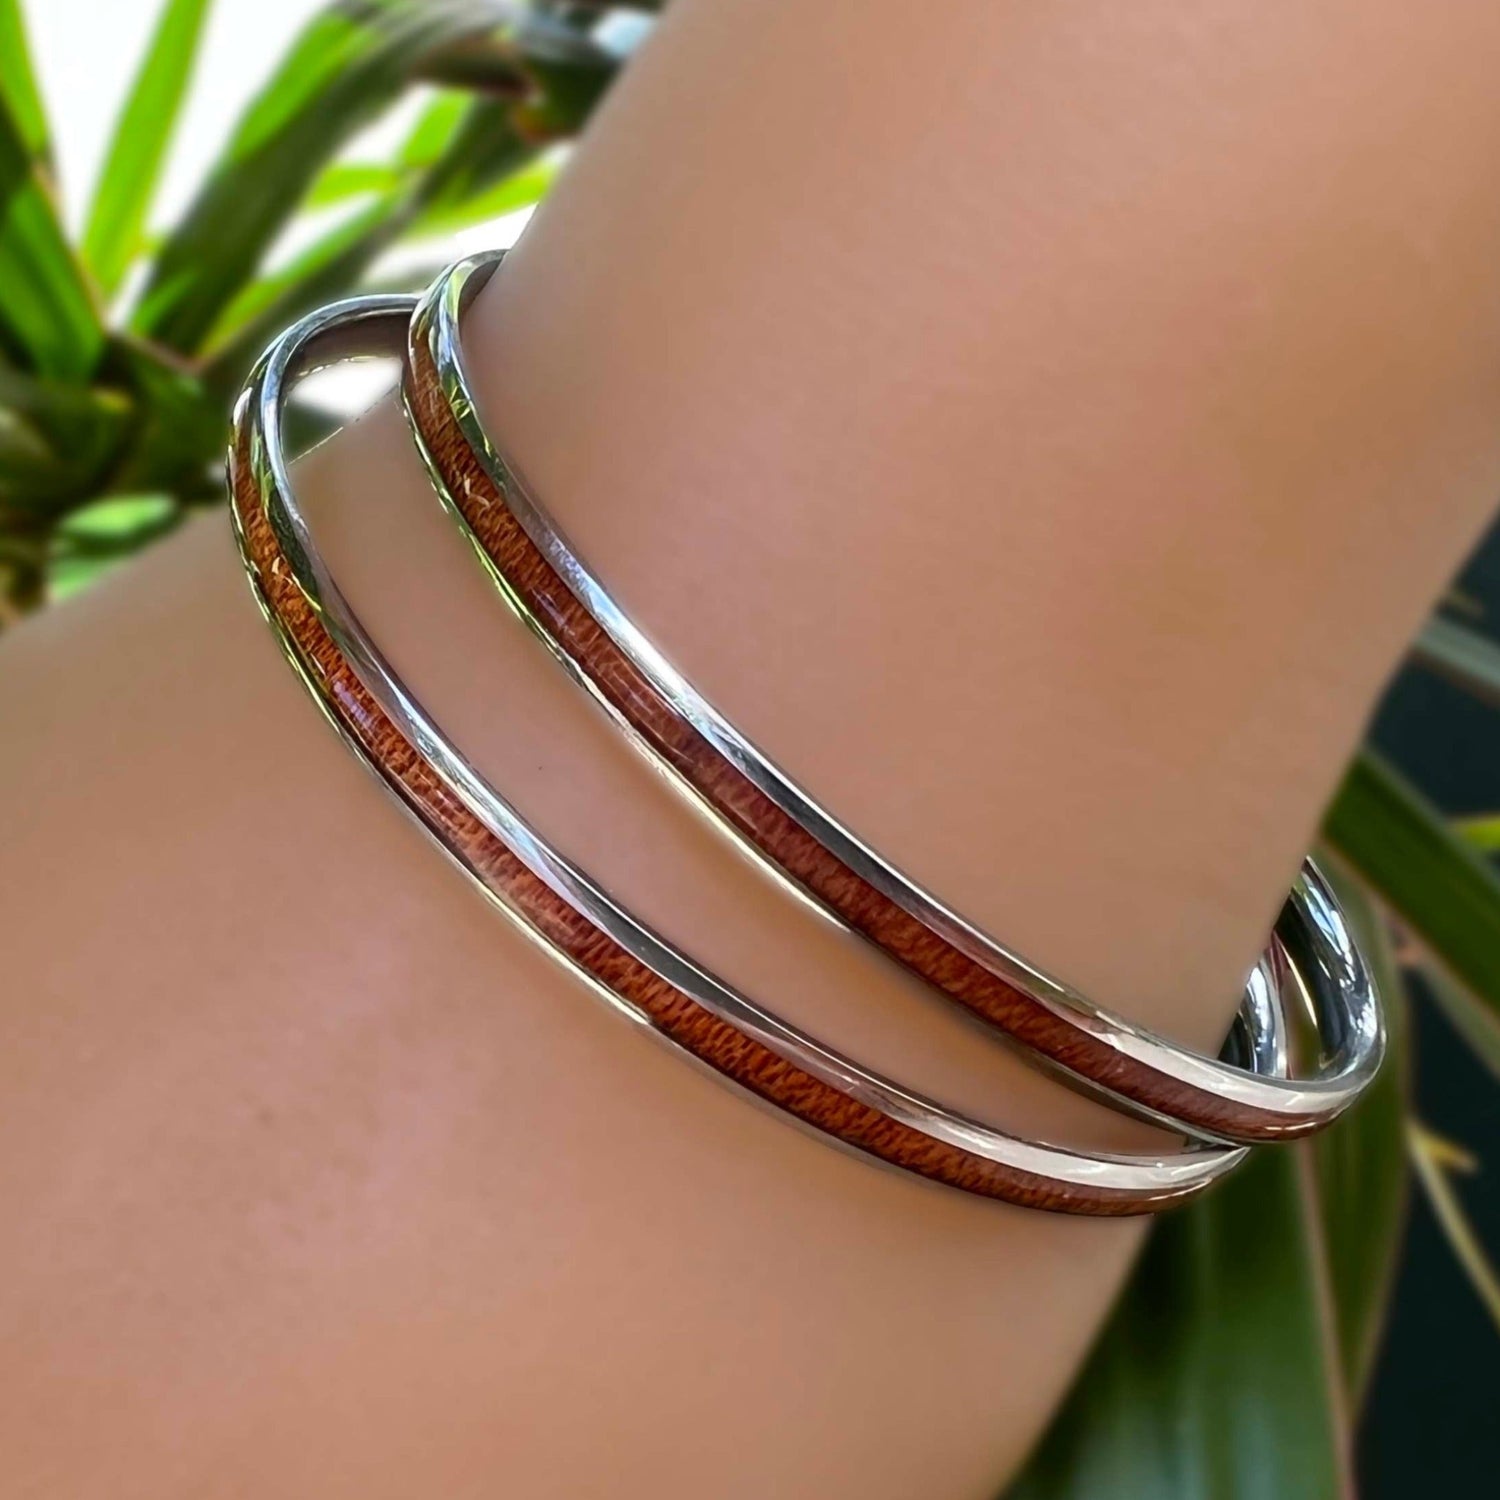 Stainless Steel and Alloy Silver-Tone Open End Twisted Cable Bangle Bracelet  - Walmart.com